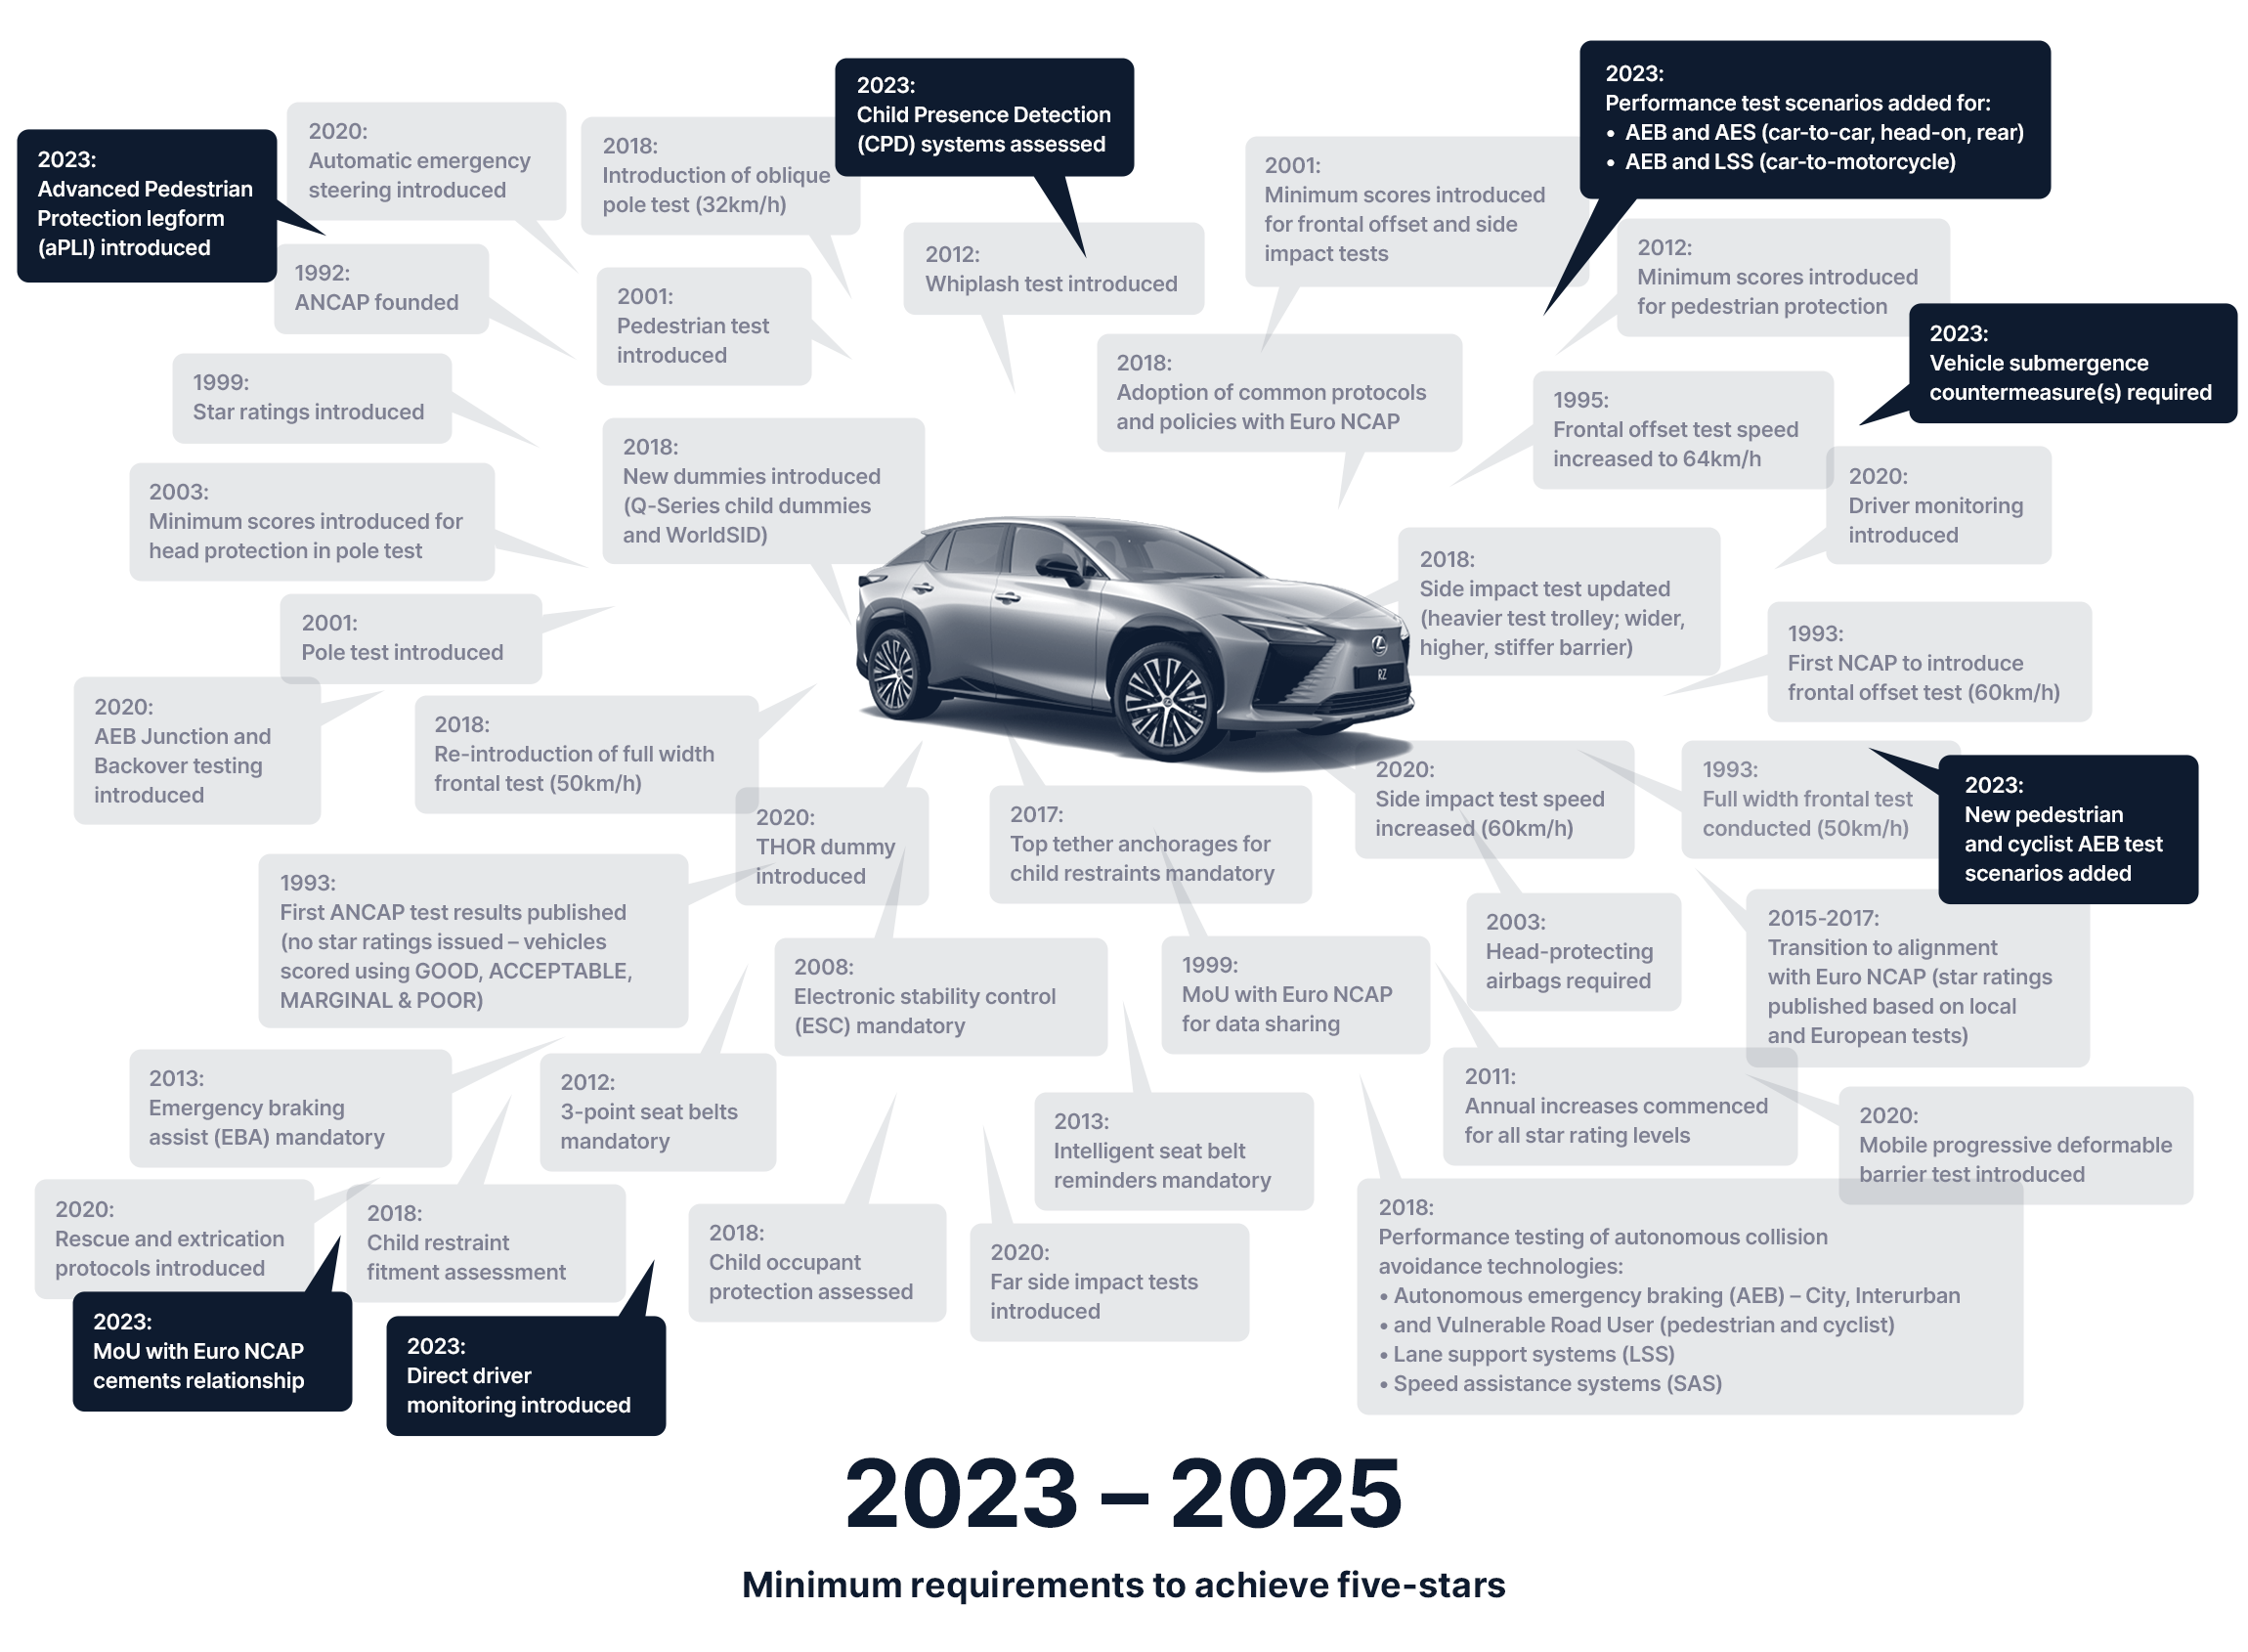 Minimum requirements to achieve an ANCAP Safety Rating in 2023 - 2025